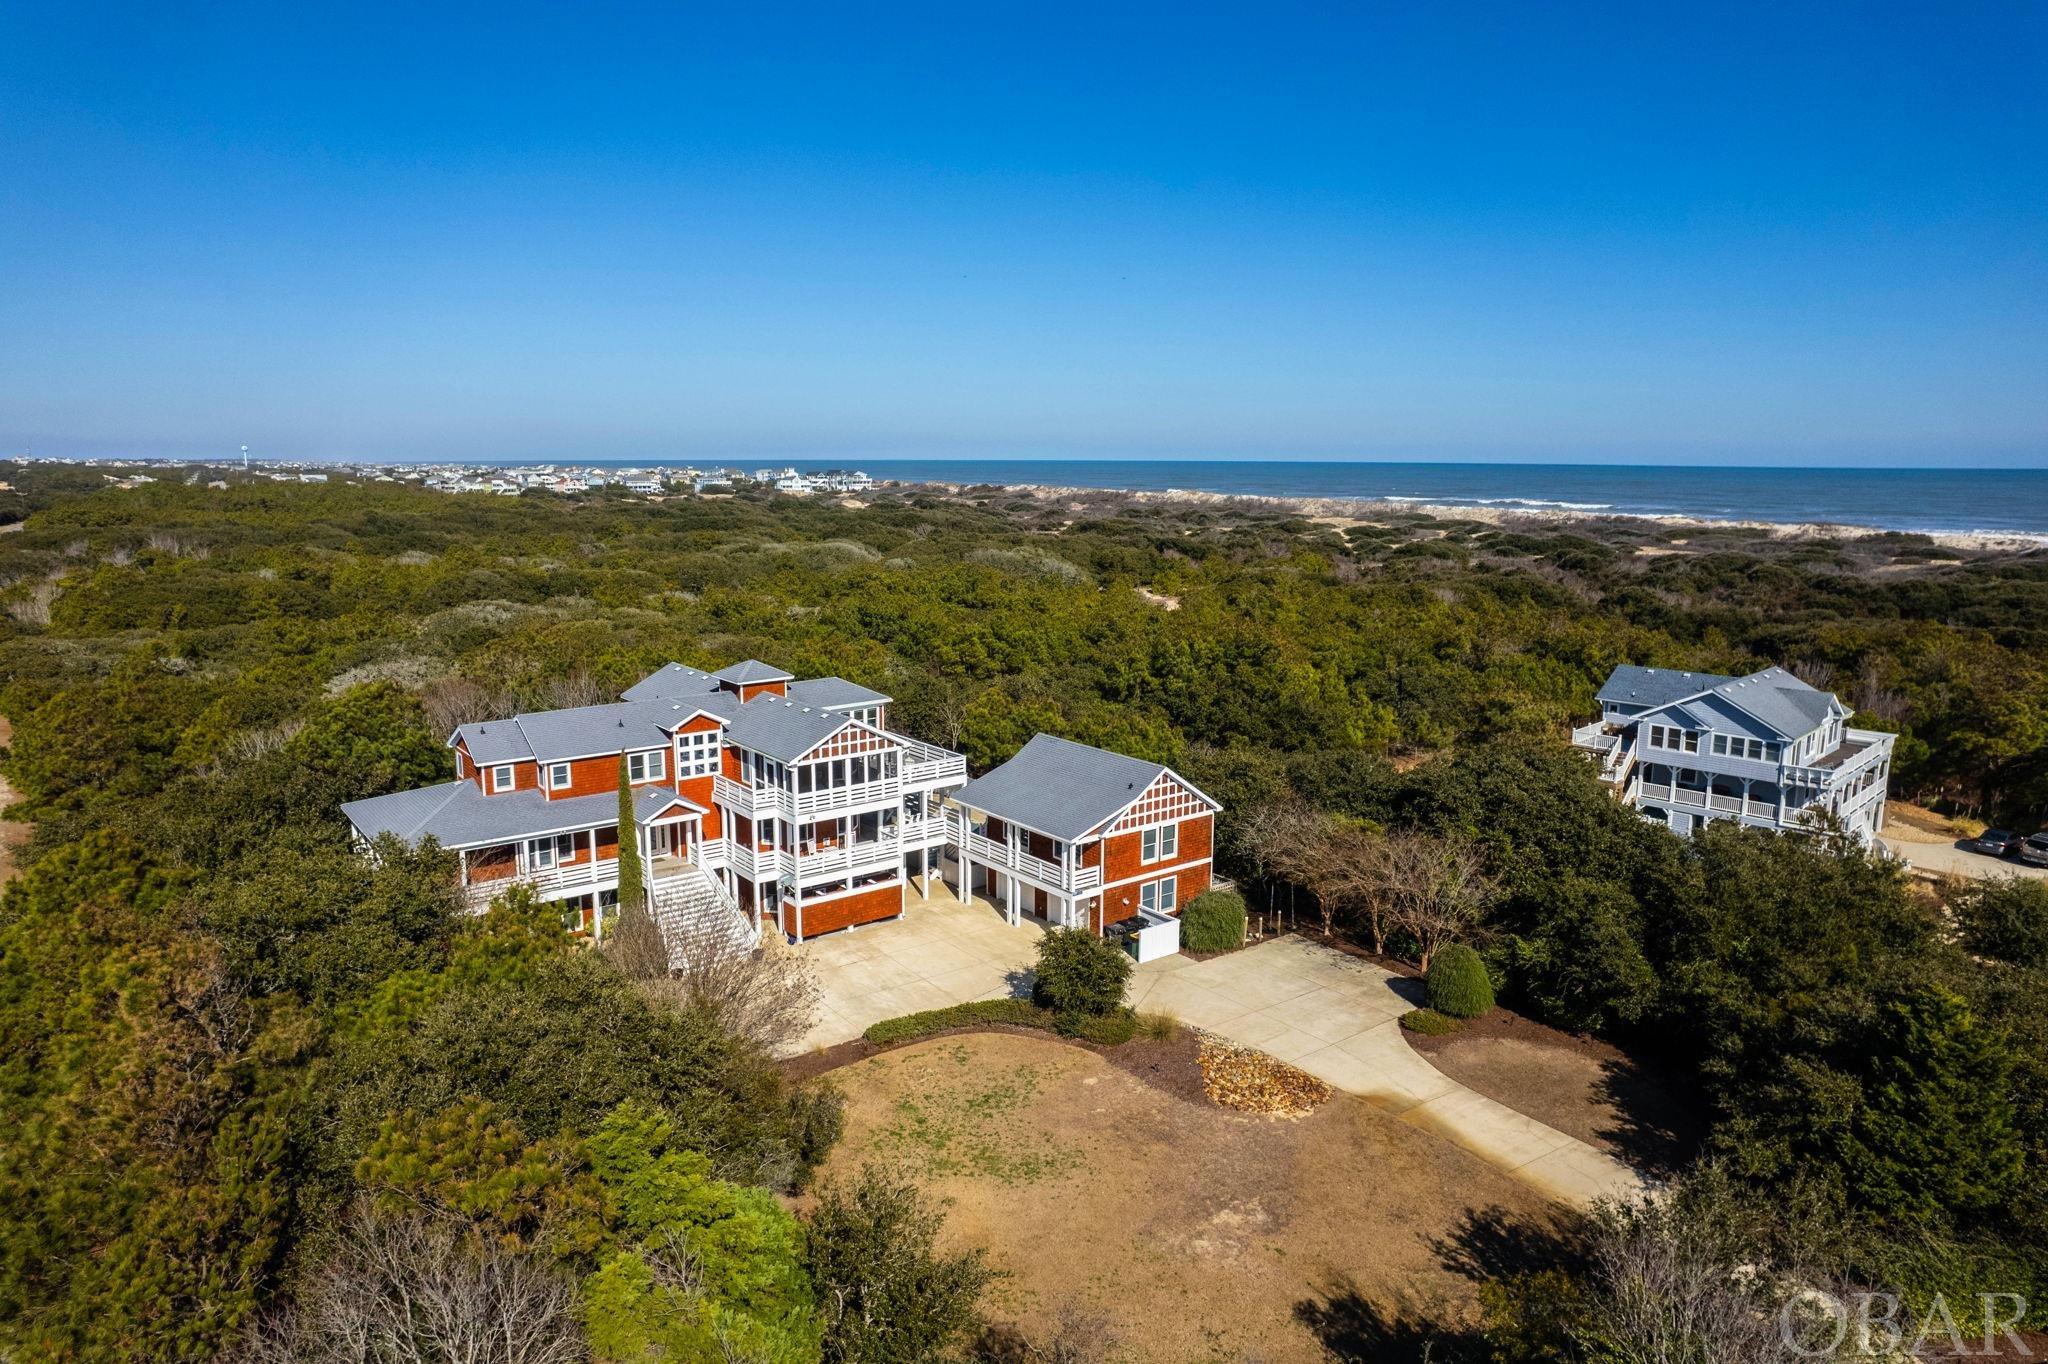 483 Spindrift Trail, Corolla, NC 27927, 10 Bedrooms Bedrooms, ,10 BathroomsBathrooms,Residential,For sale,Spindrift Trail,124587